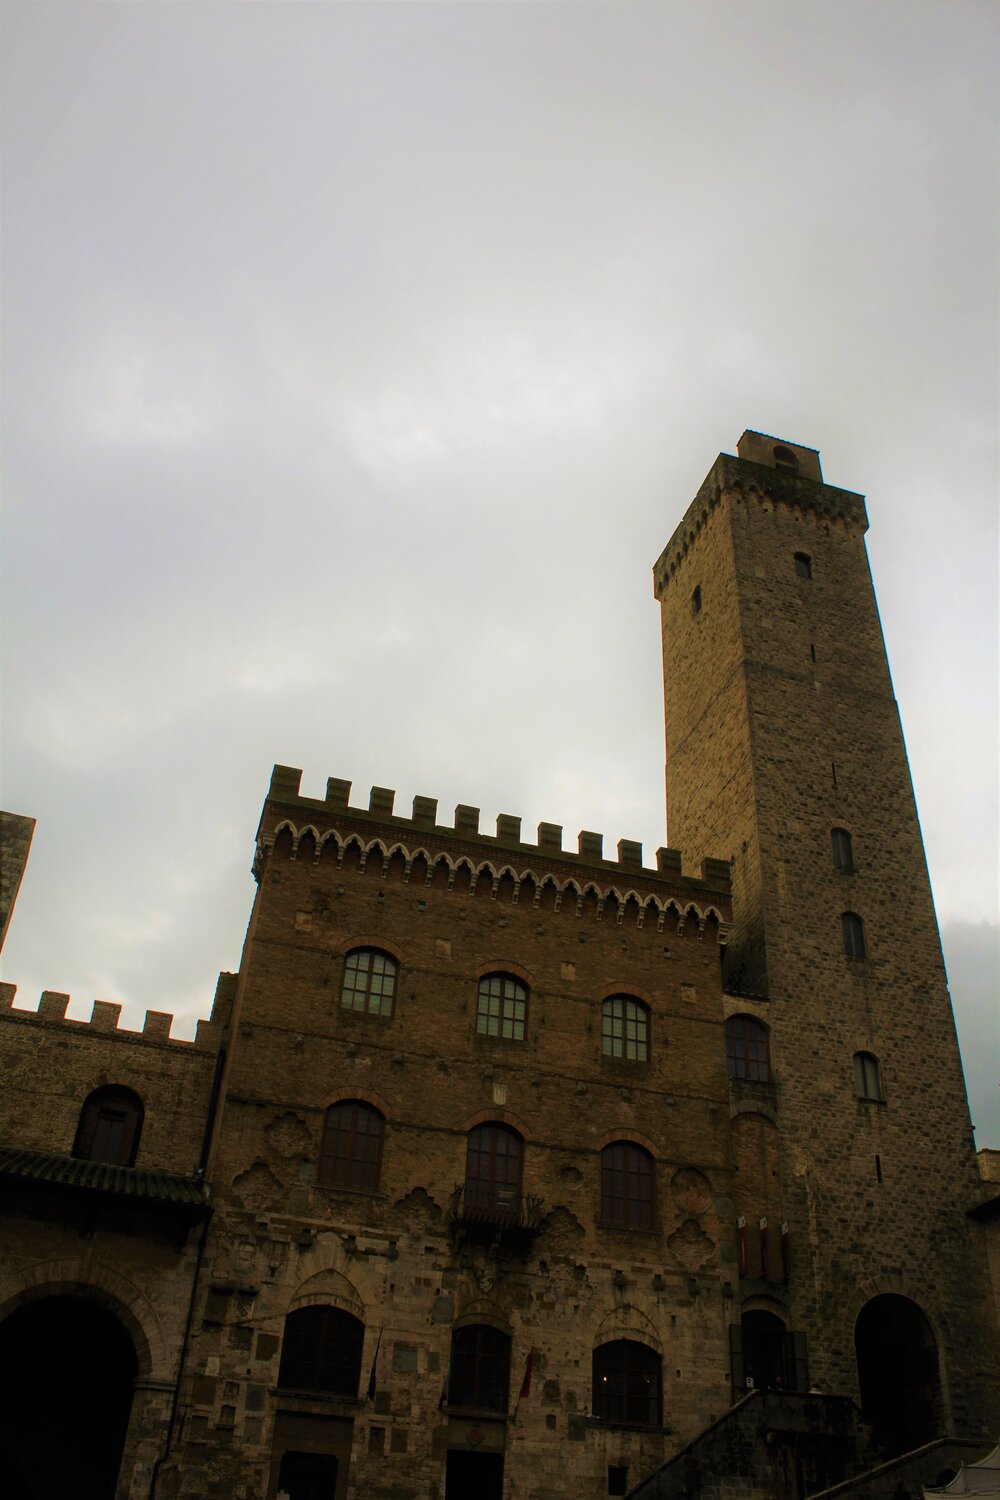 Looking up at the tower from Piazza della Cisterna